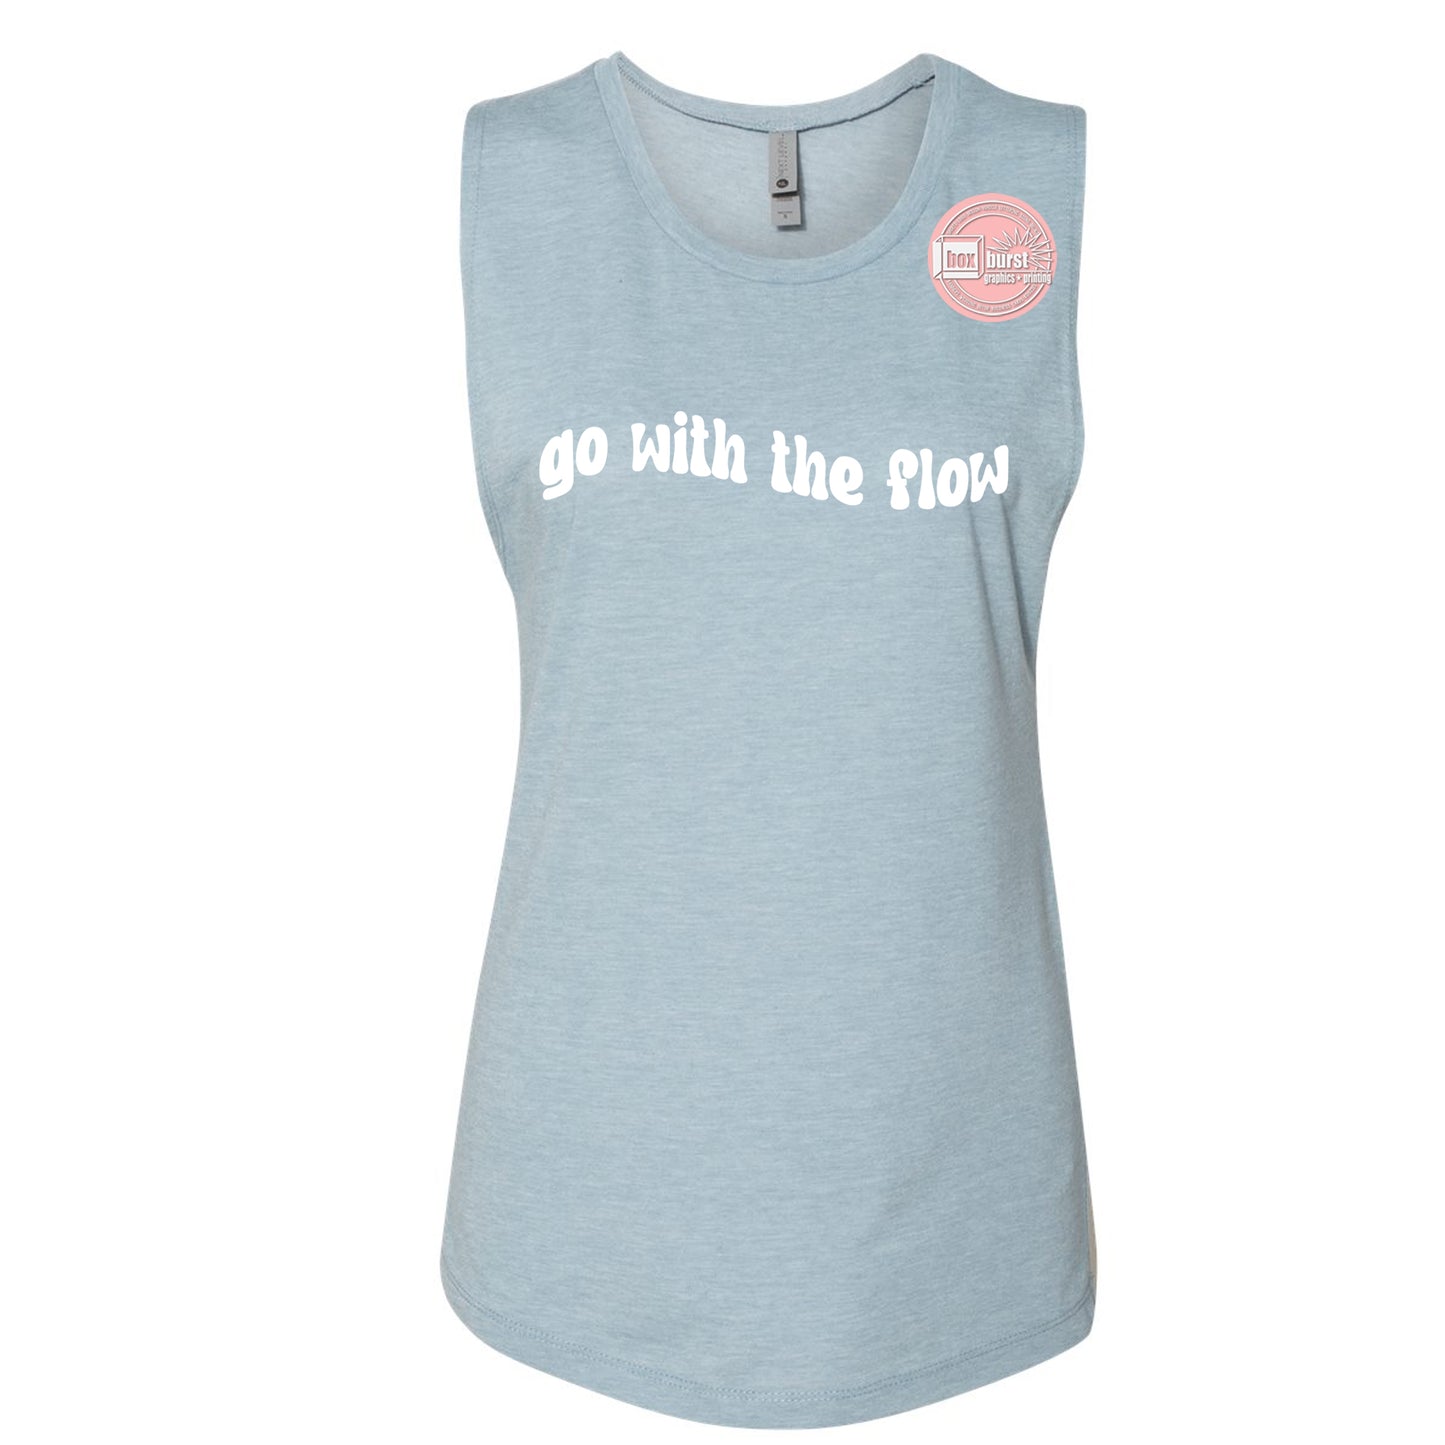 Go with the flow muscle tank top women's muscle tank